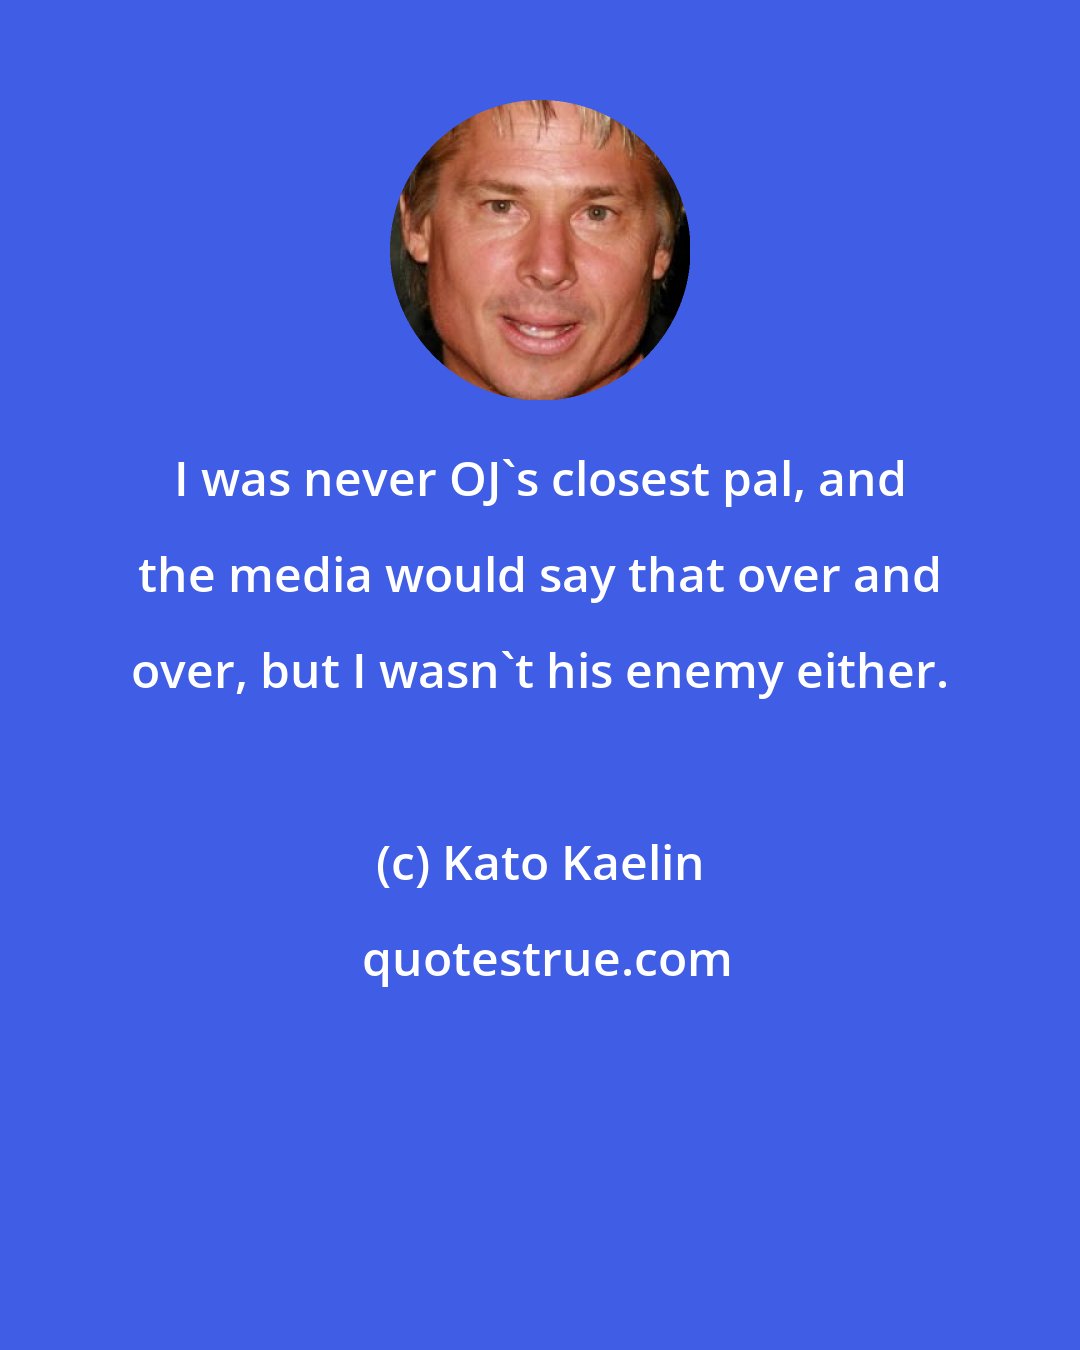 Kato Kaelin: I was never OJ's closest pal, and the media would say that over and over, but I wasn't his enemy either.